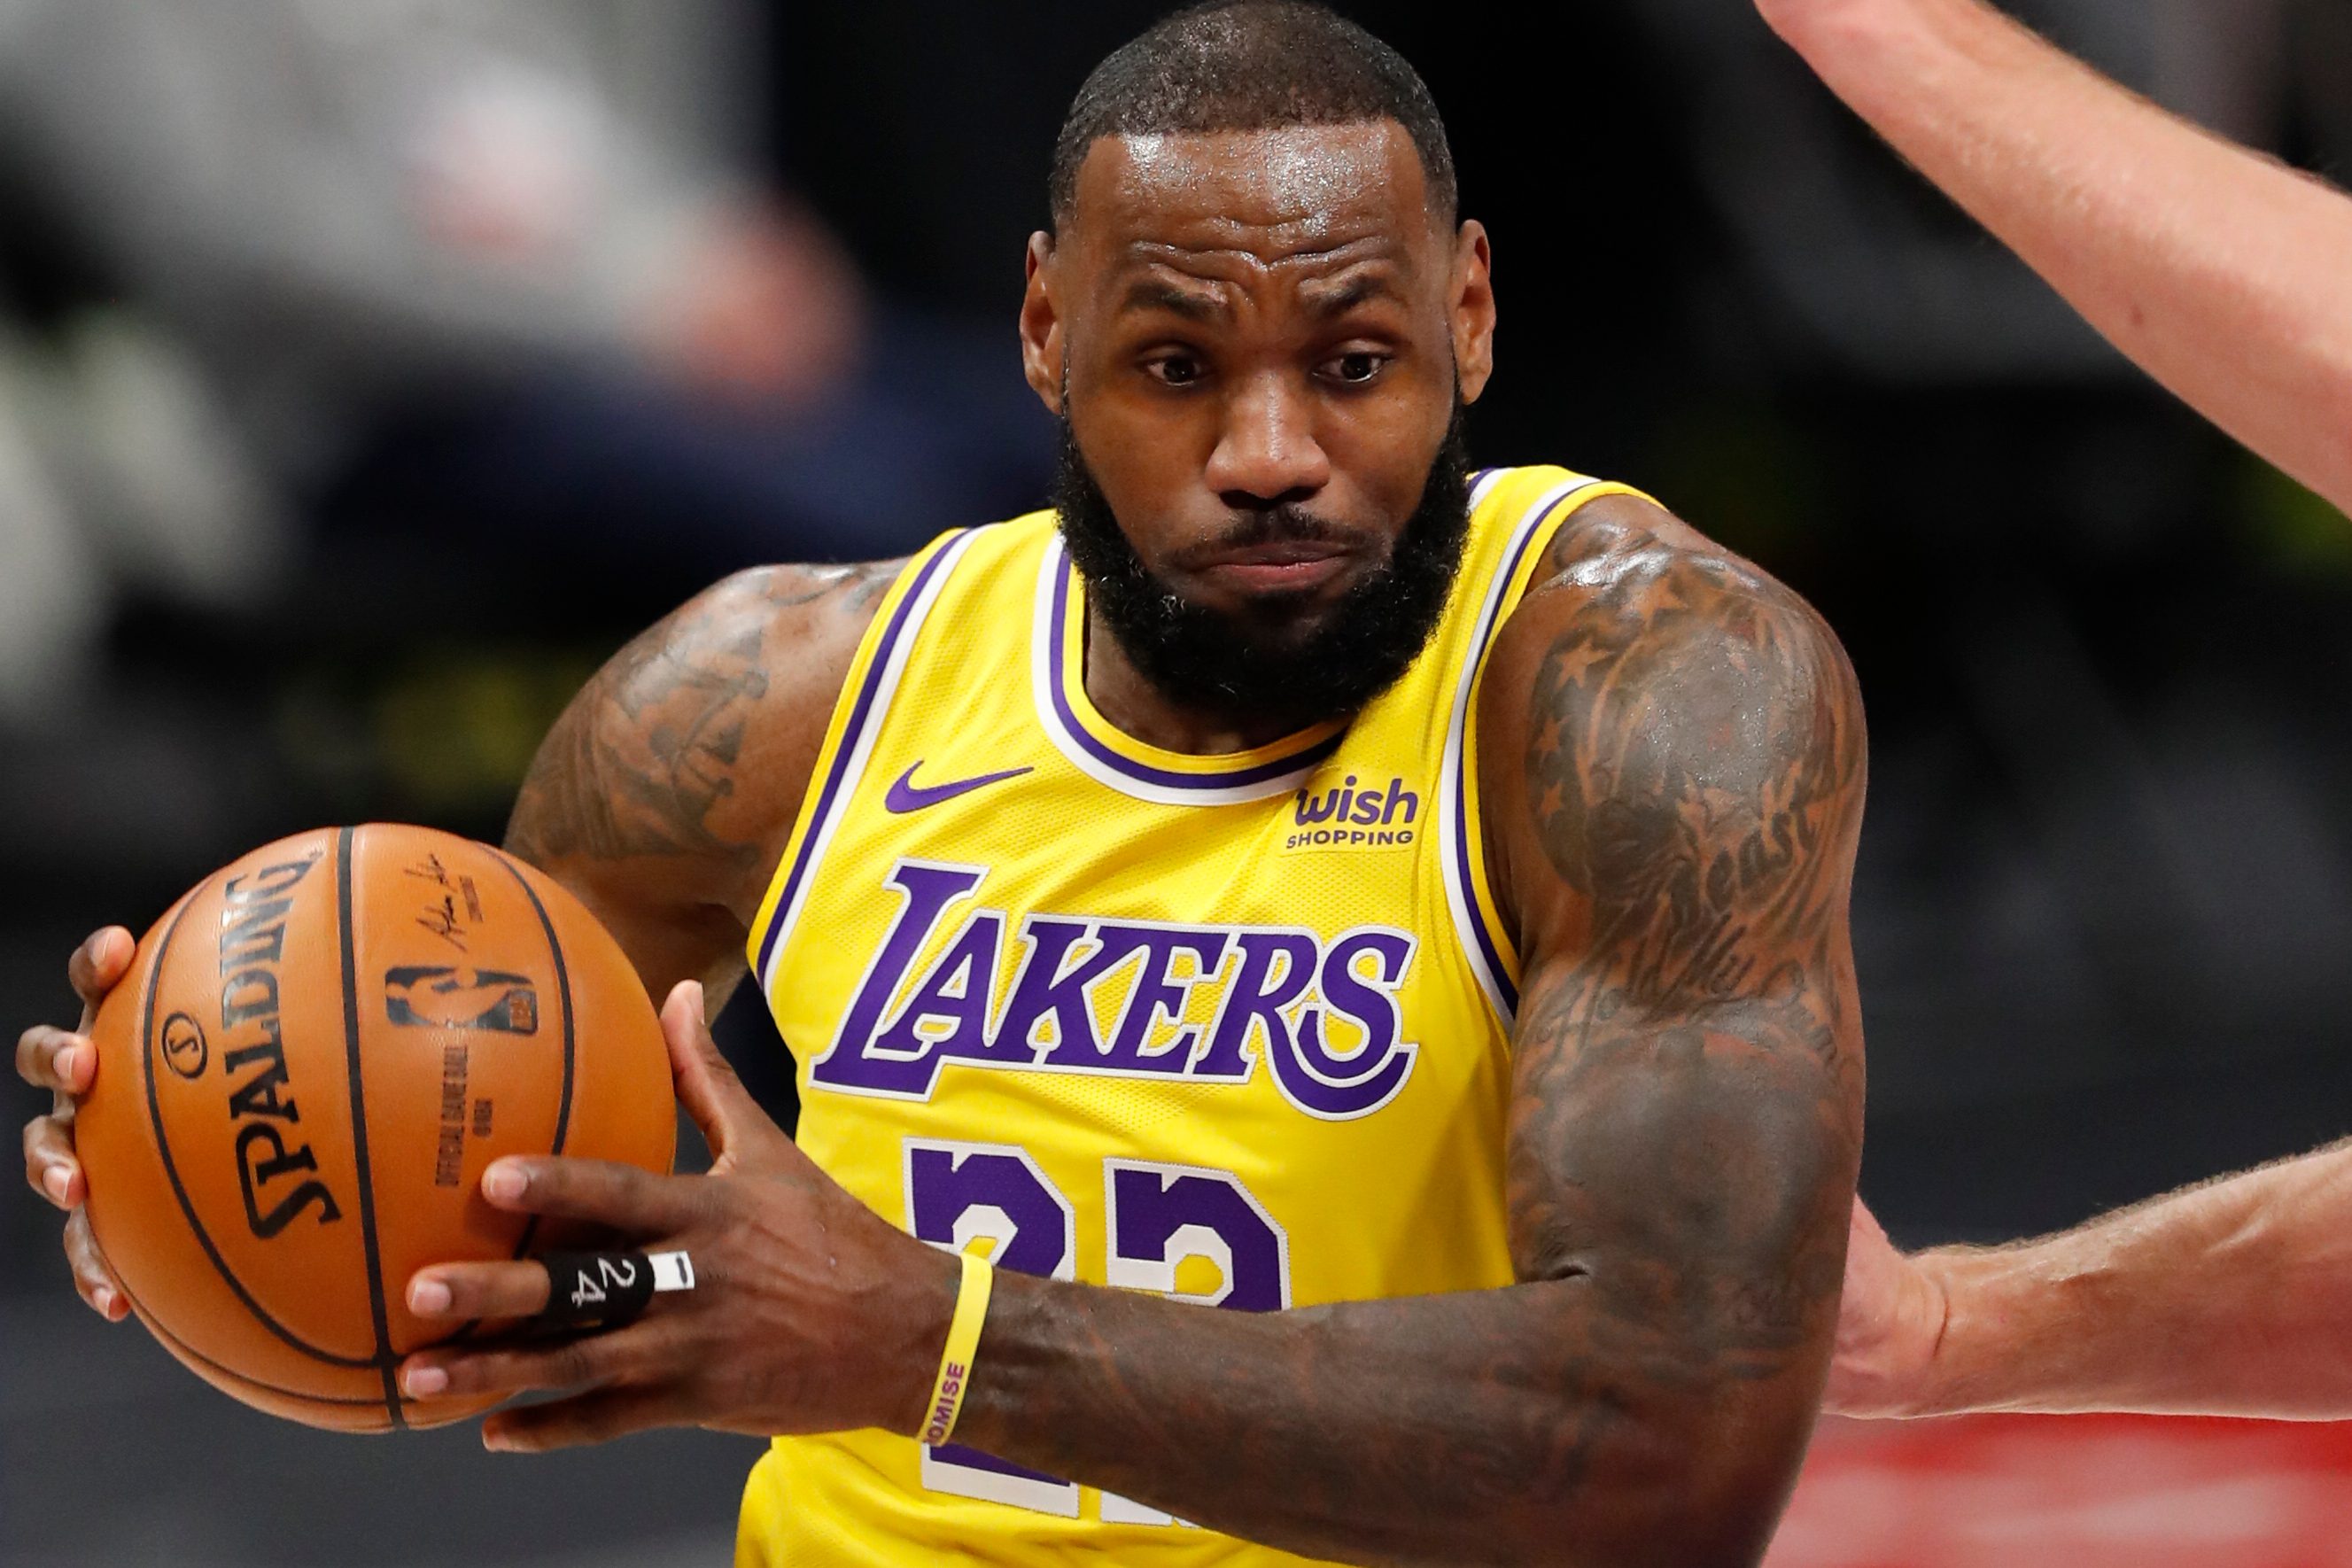 ‘Courtside Karen was MAD’: LeBron James responds to hecklers in Atlanta row